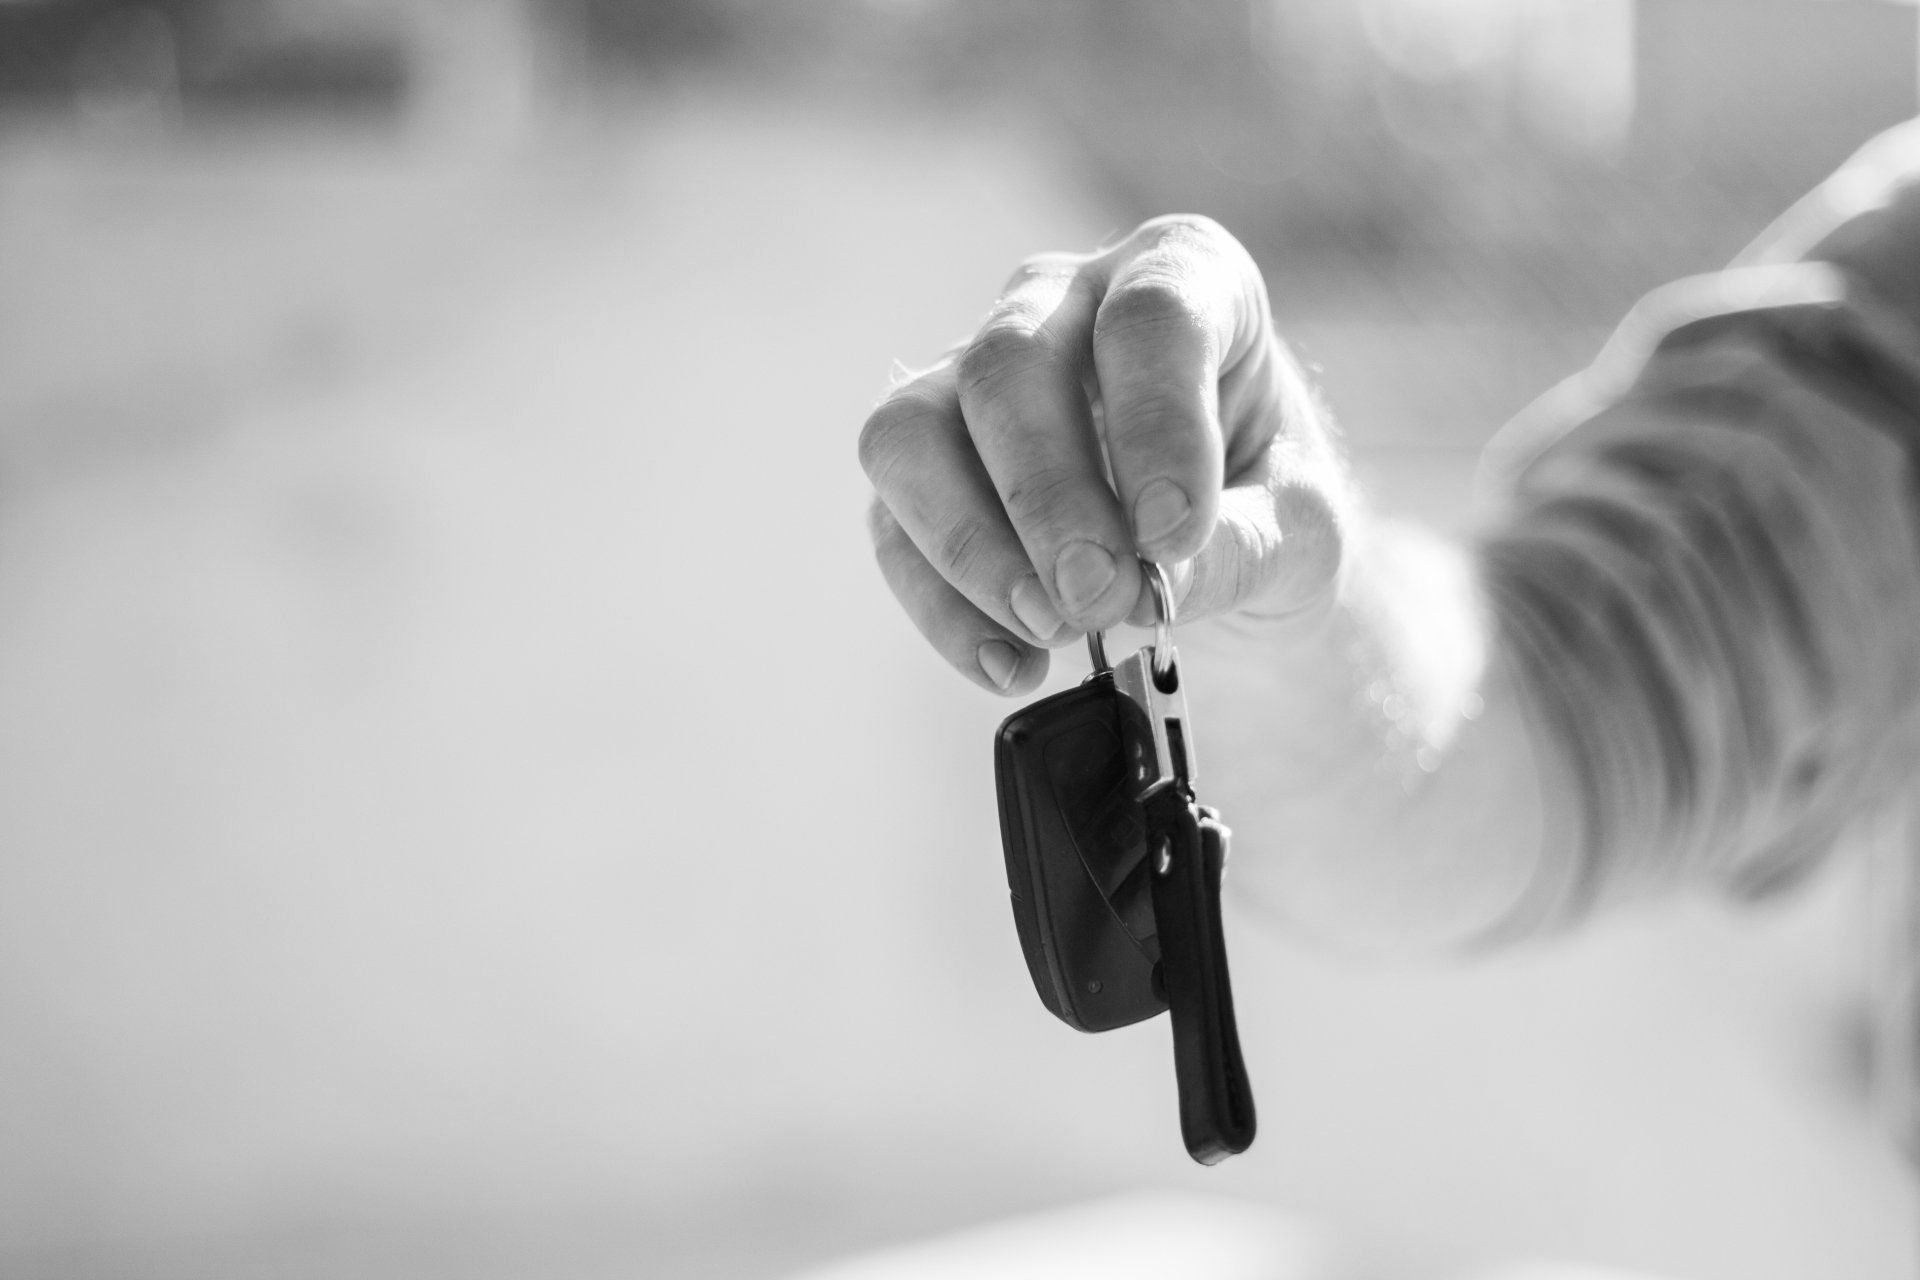 A person is holding a car key in their hand in a black and white photo.